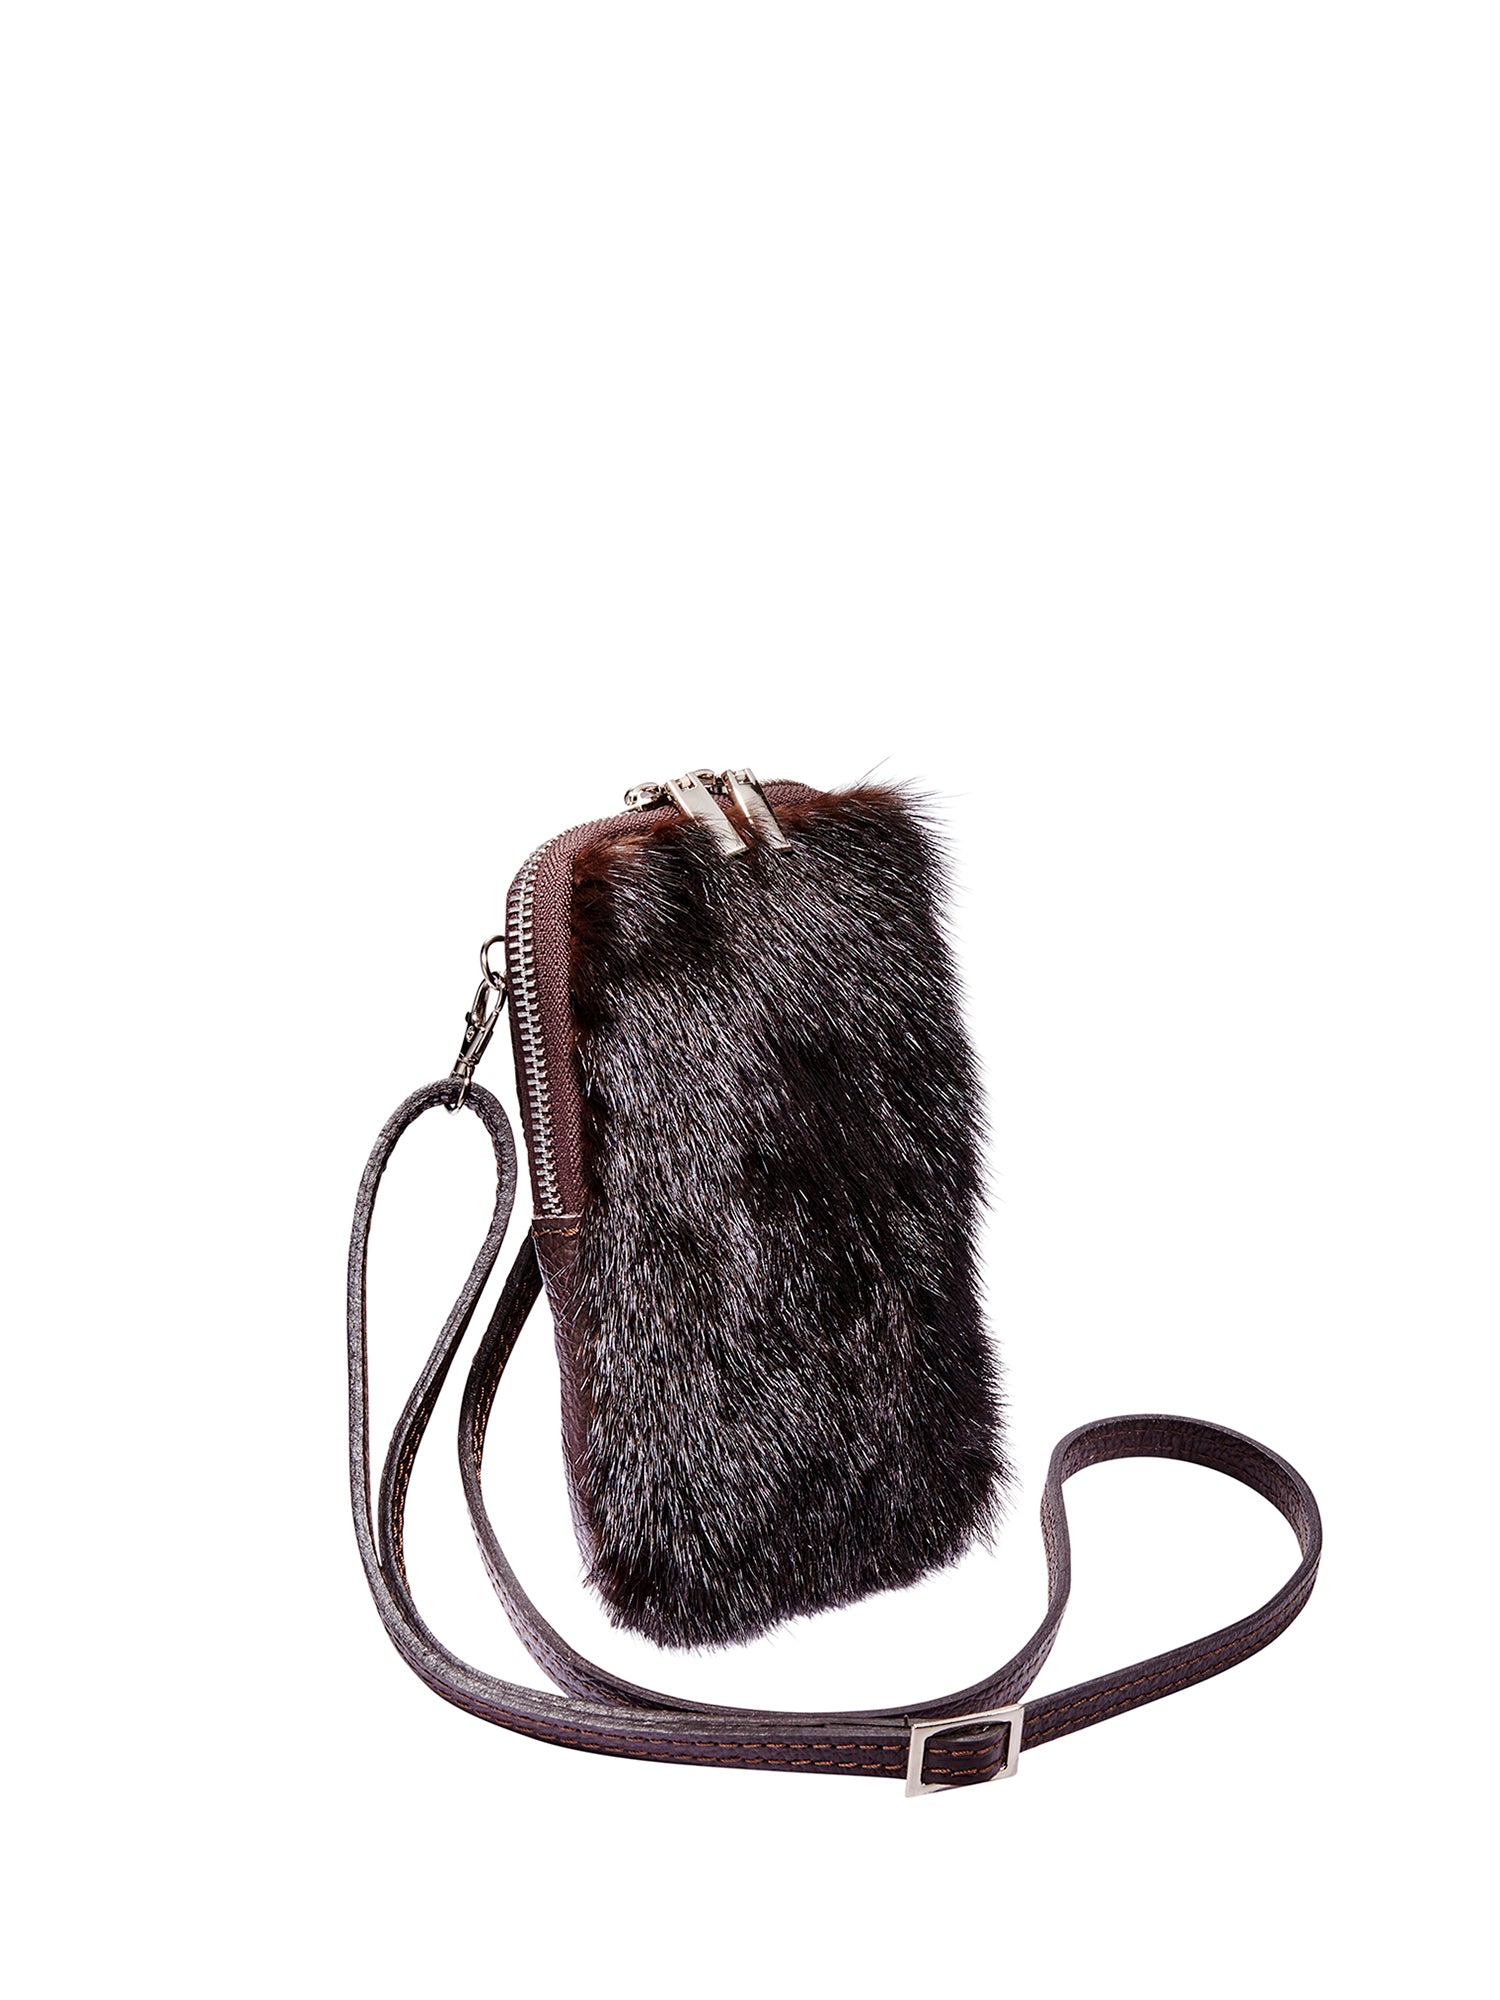 Womens Real Mink Fur Purse Wallet Phone Pouch Party Bag Crossbody Bag w  Chain